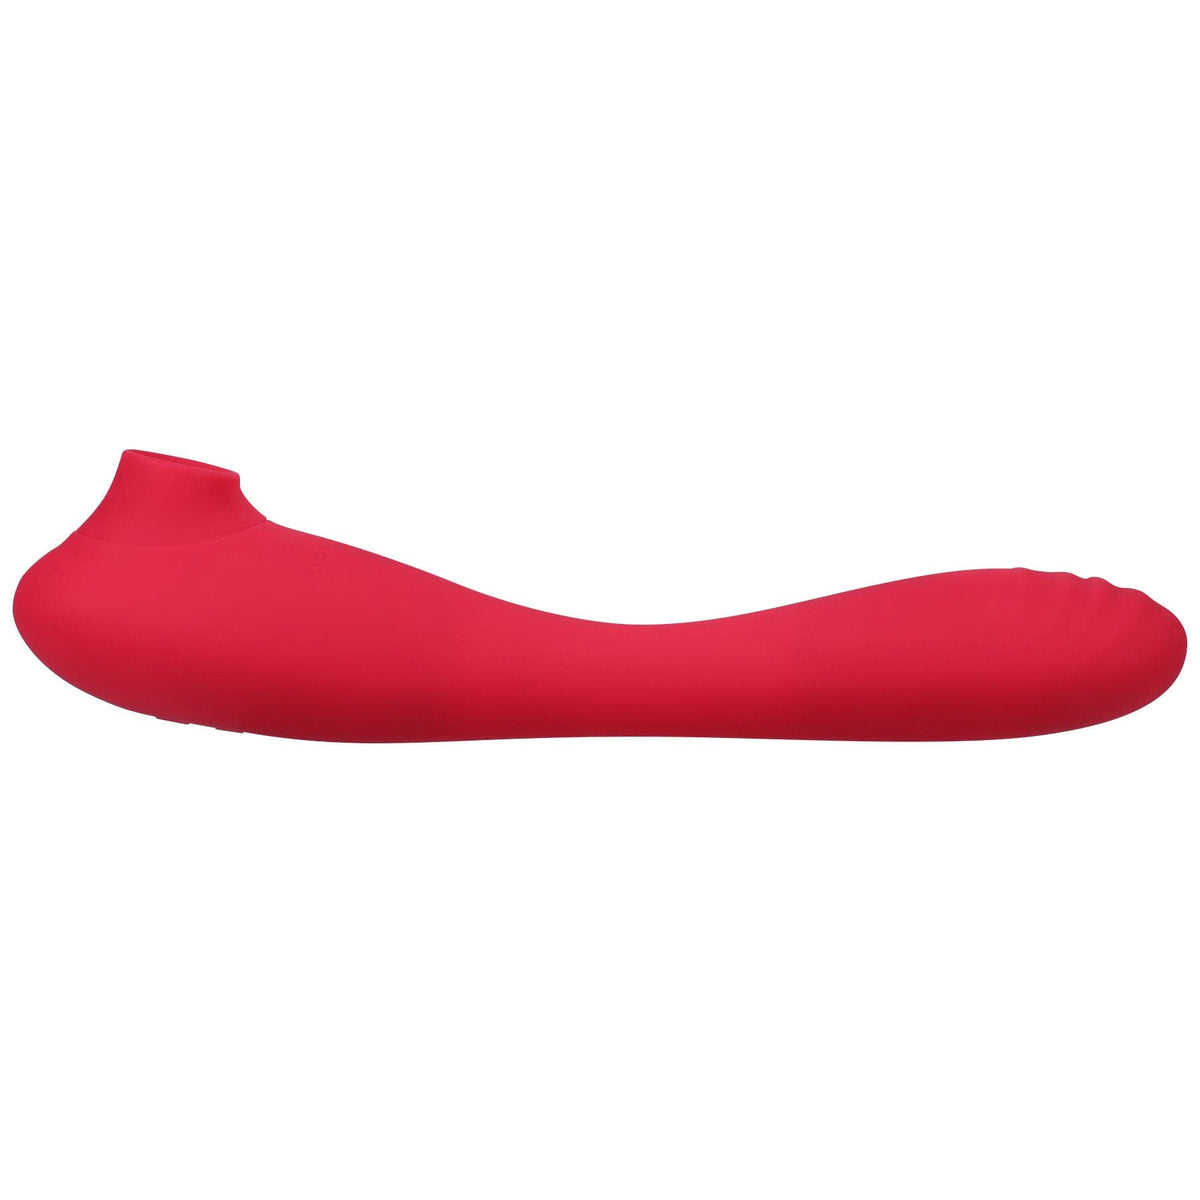 this product sucks sucking clitoral stimulator with bendable g spot vibrator pink